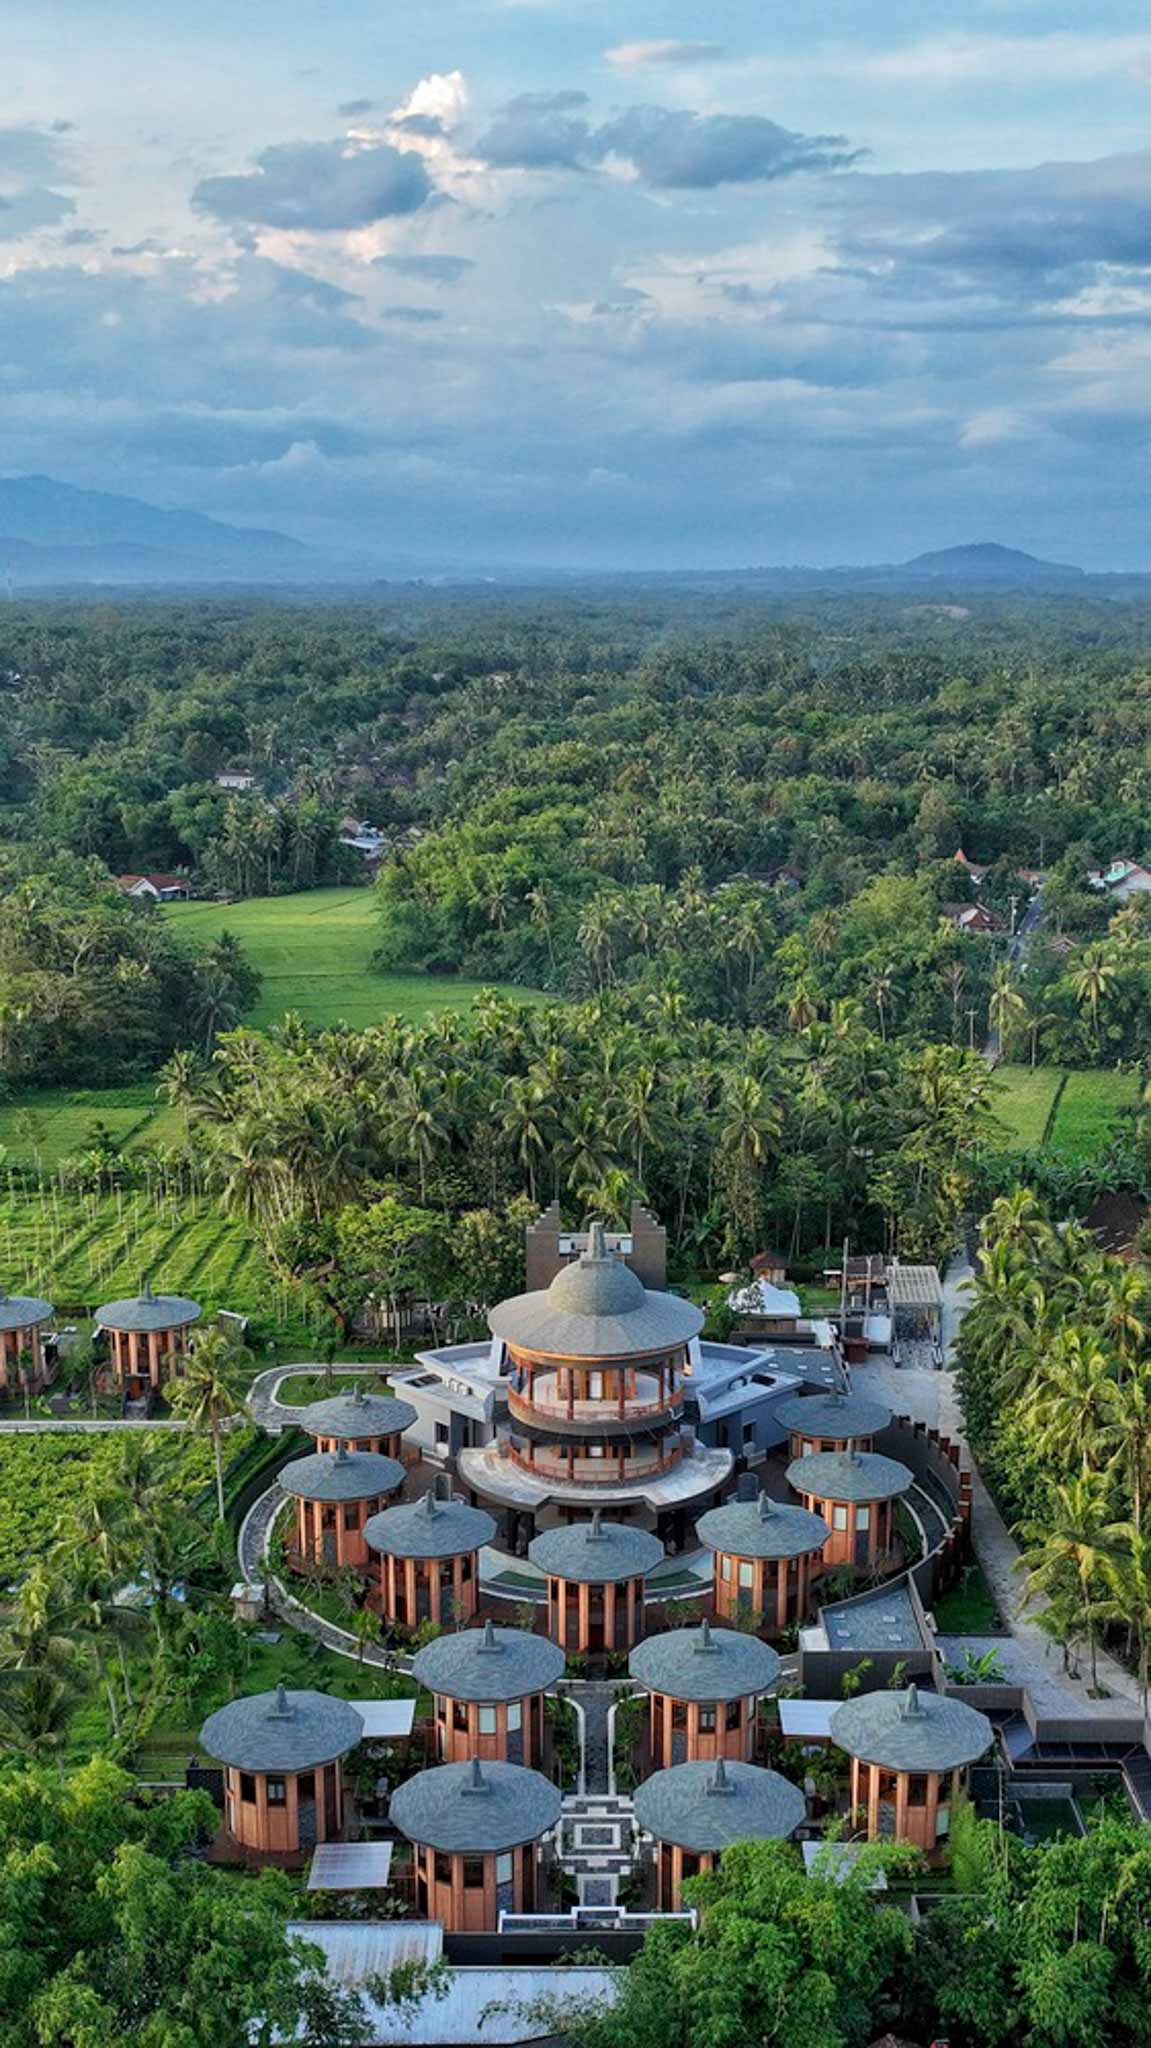 From overhead, the resort in Indonesia almost radiates a zen unique to temples.